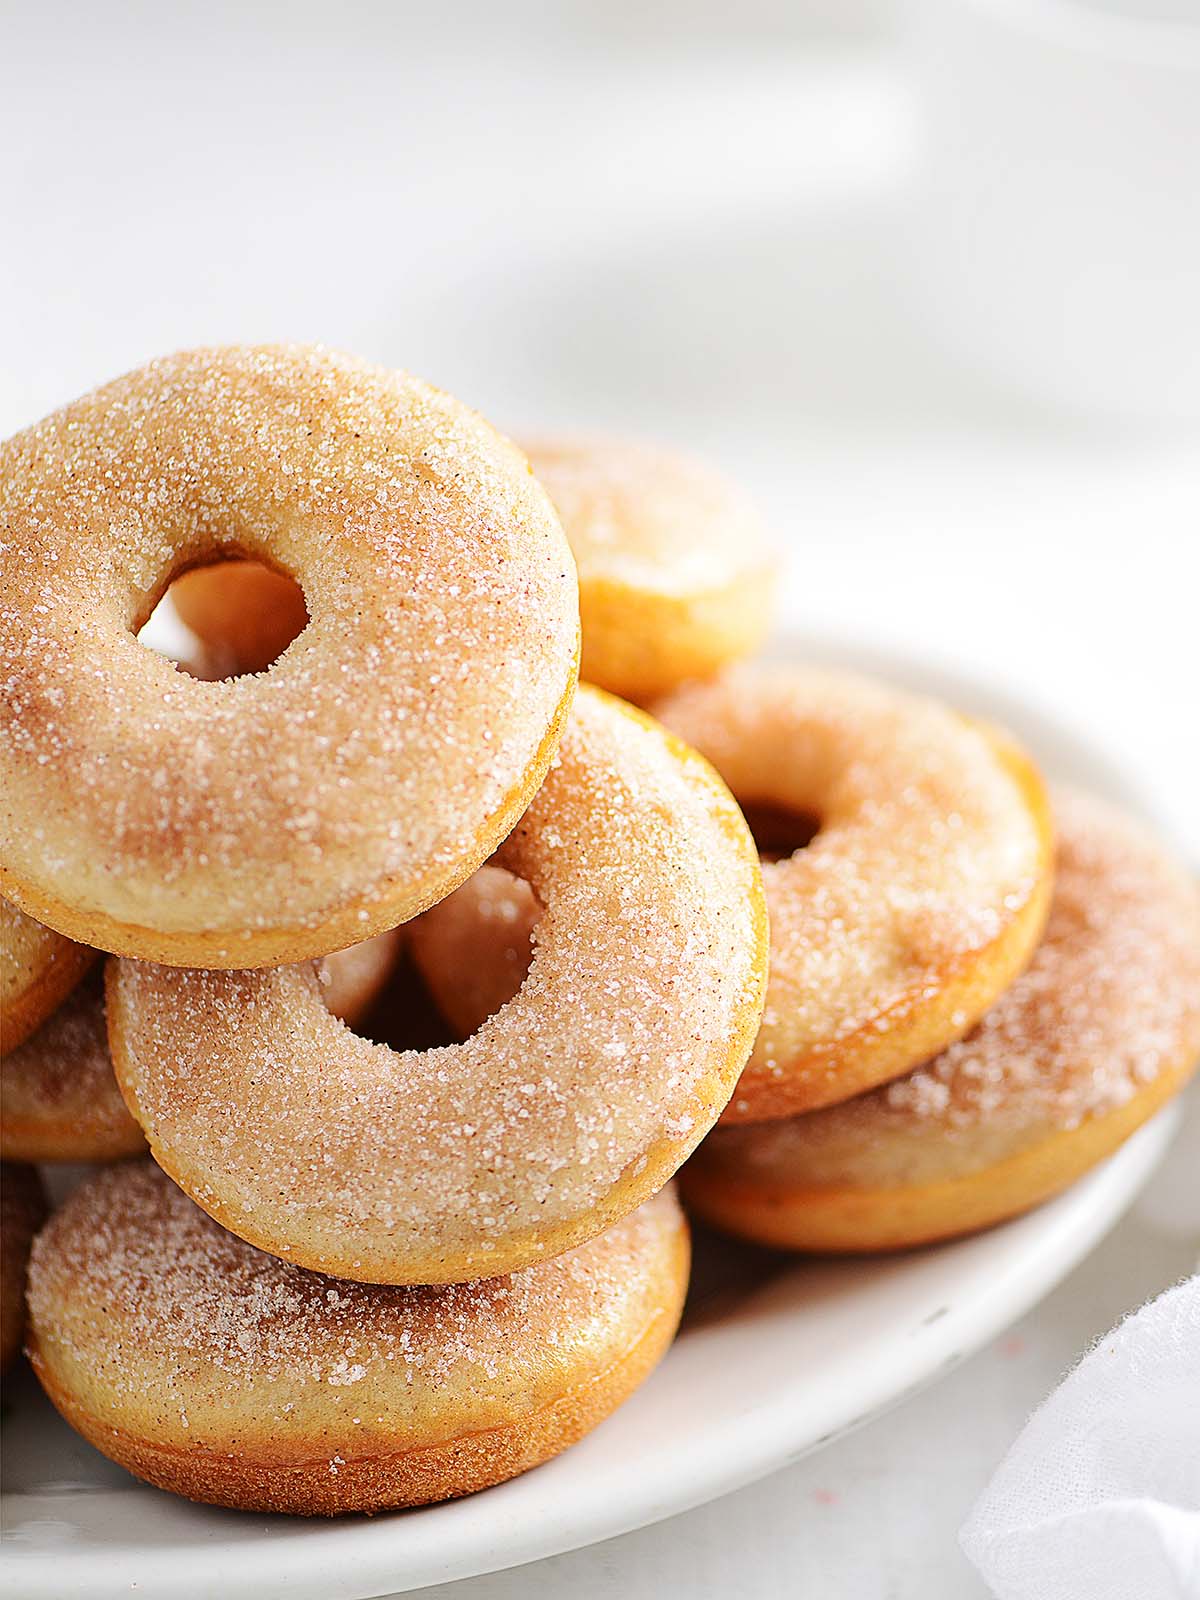 Cinnamon donuts placed on a plate as a stack.